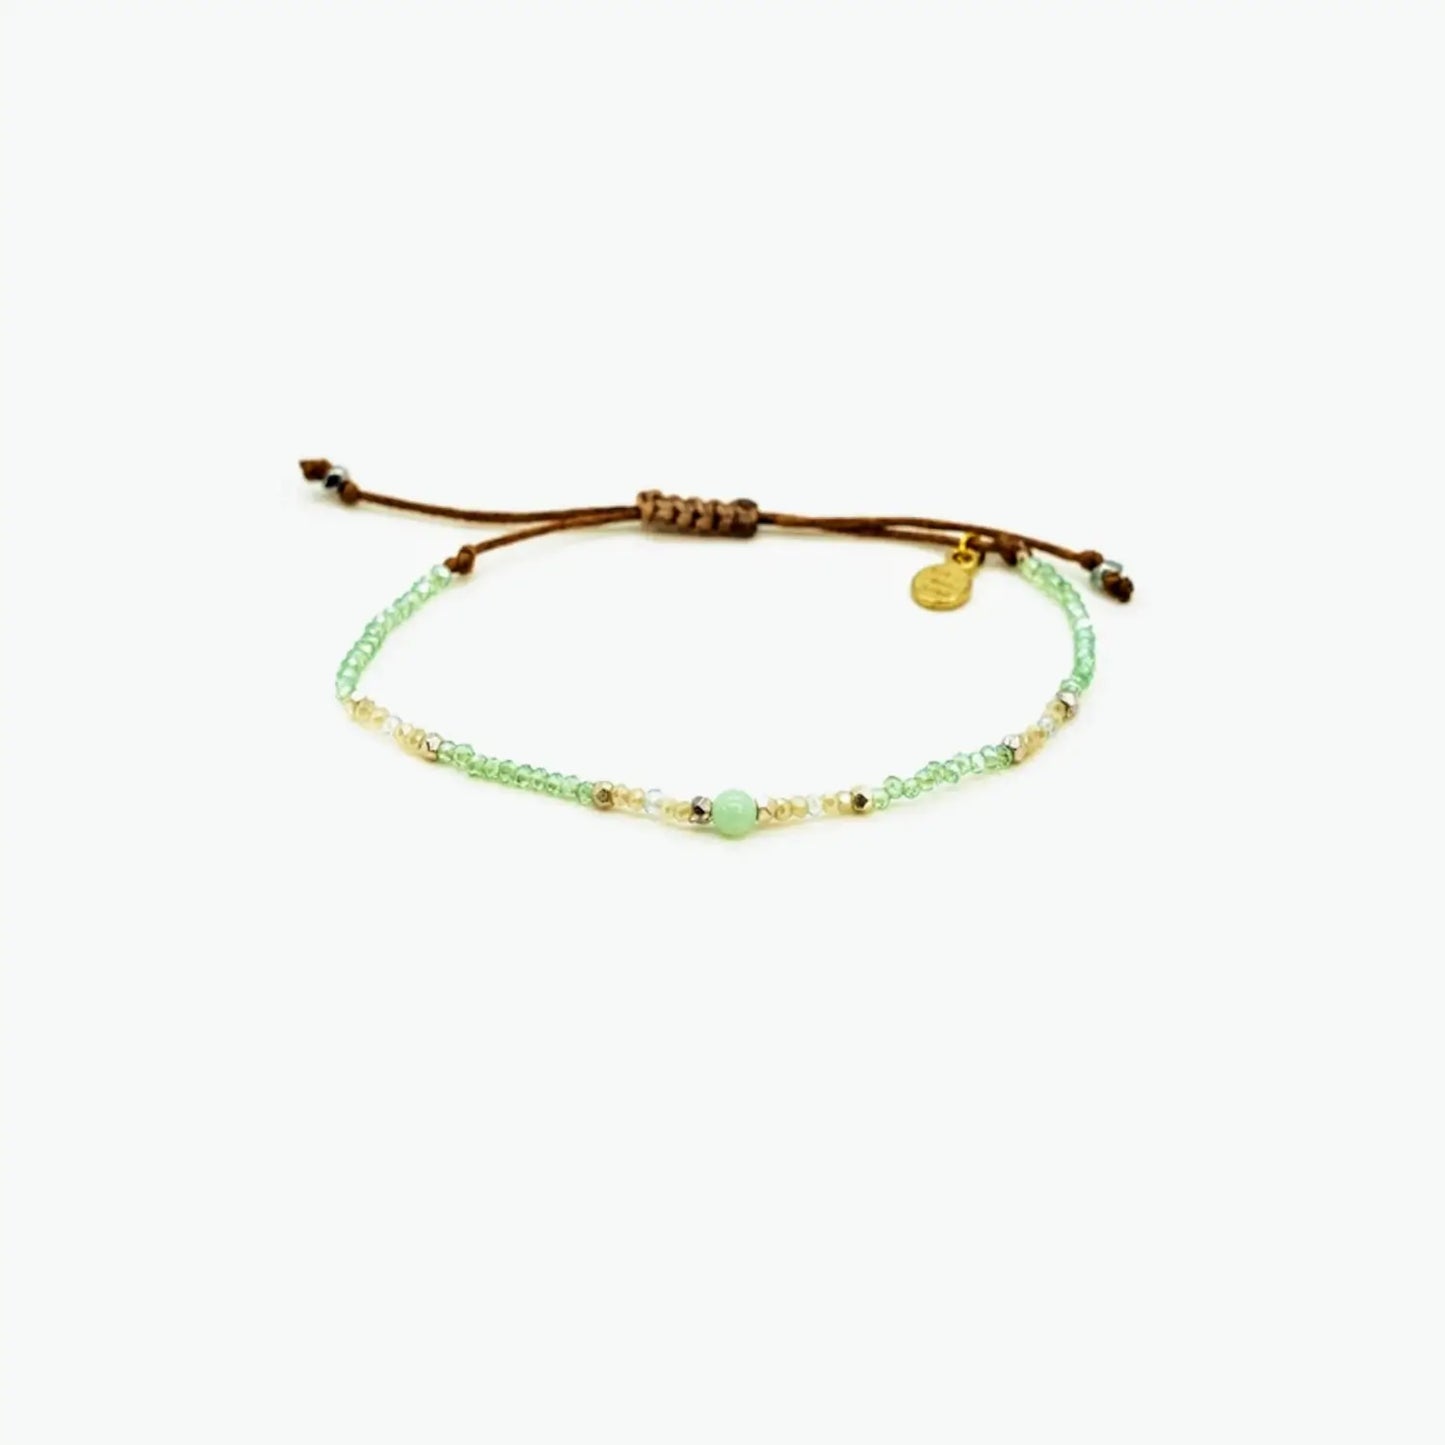 crystal bracelet with green Amazonite bead in center